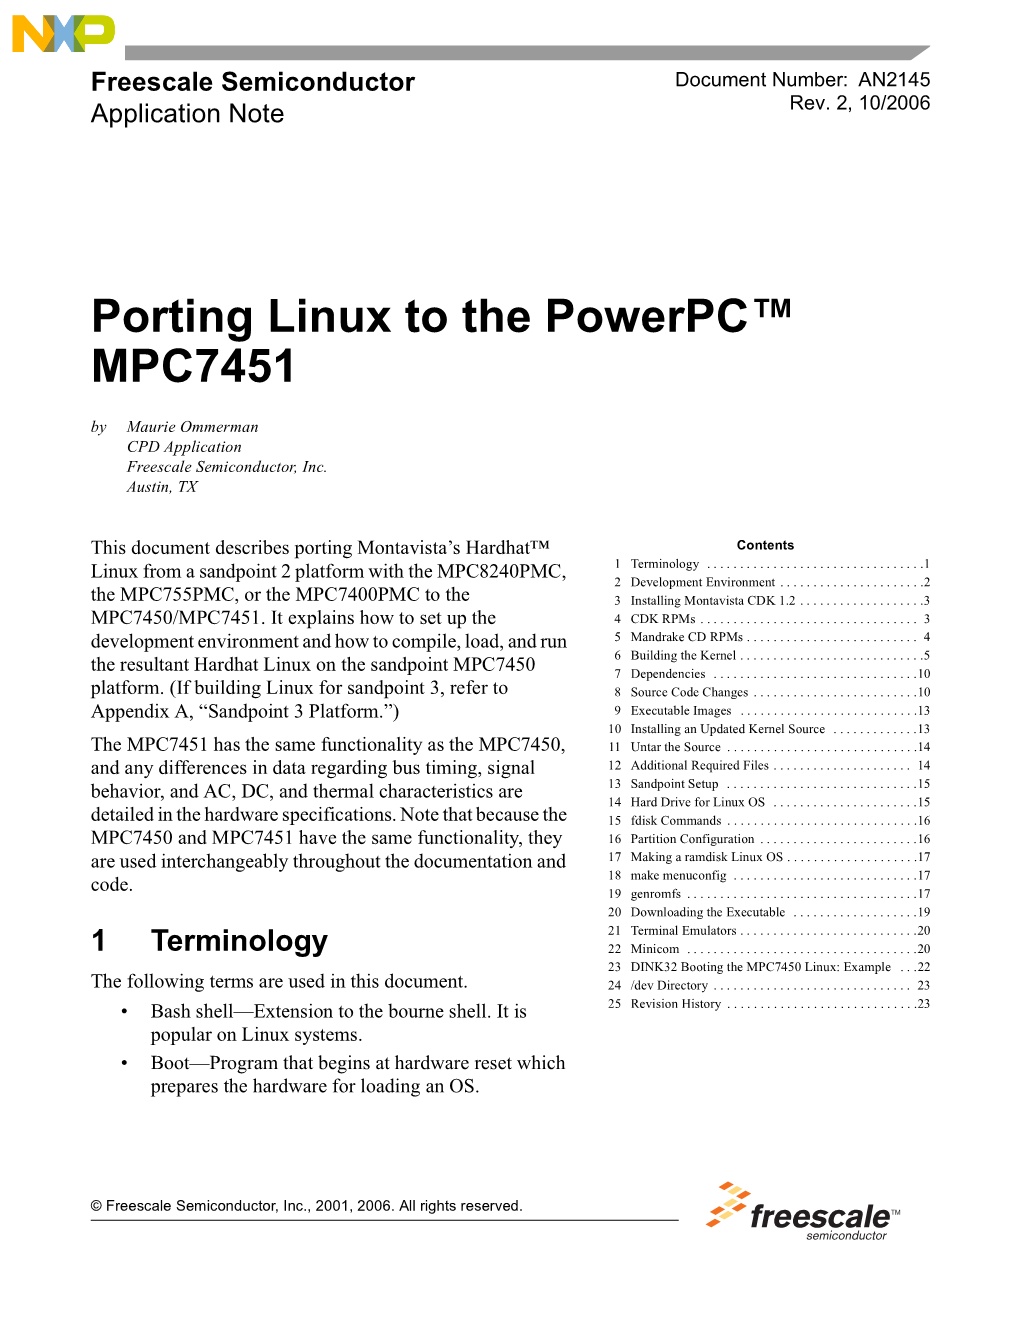 Porting Linux to the Powerpc MPC7451